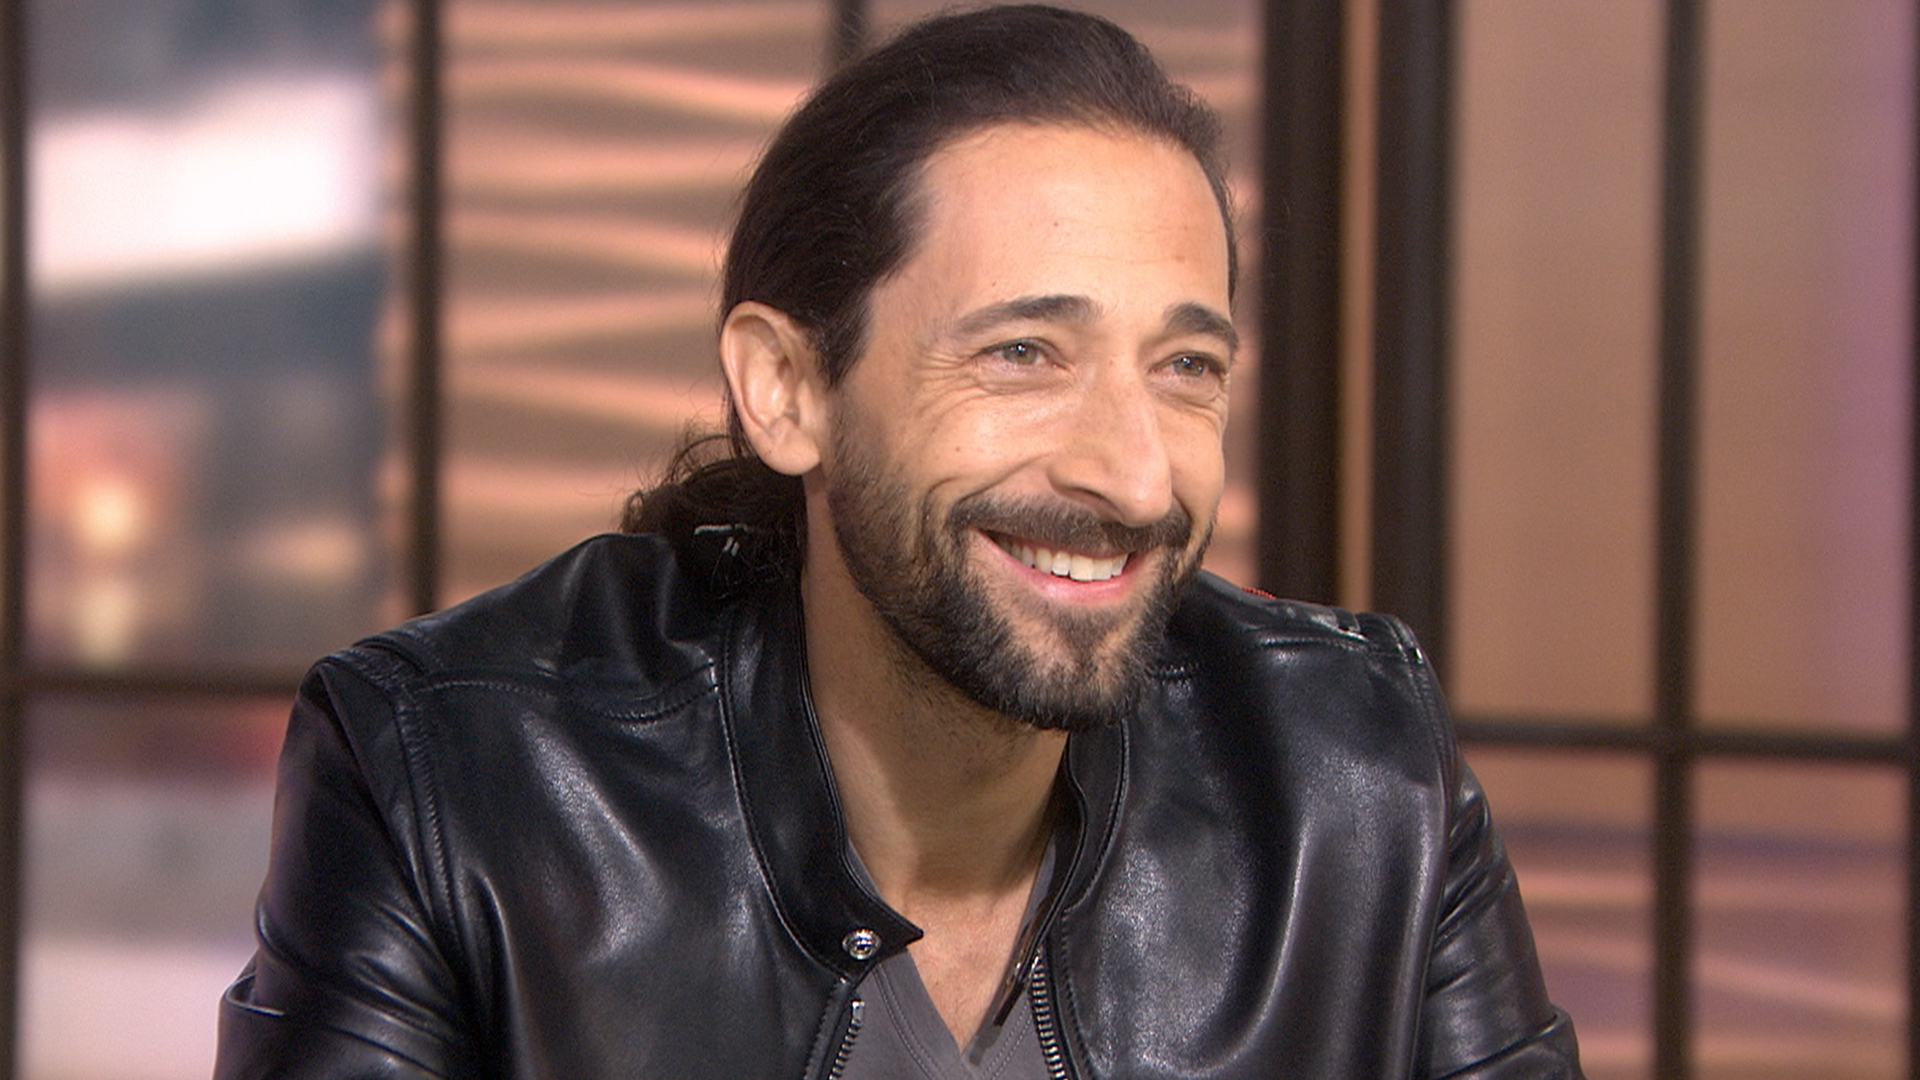 Adrien Brody on myCast  Fan Casting Your Favorite Stories